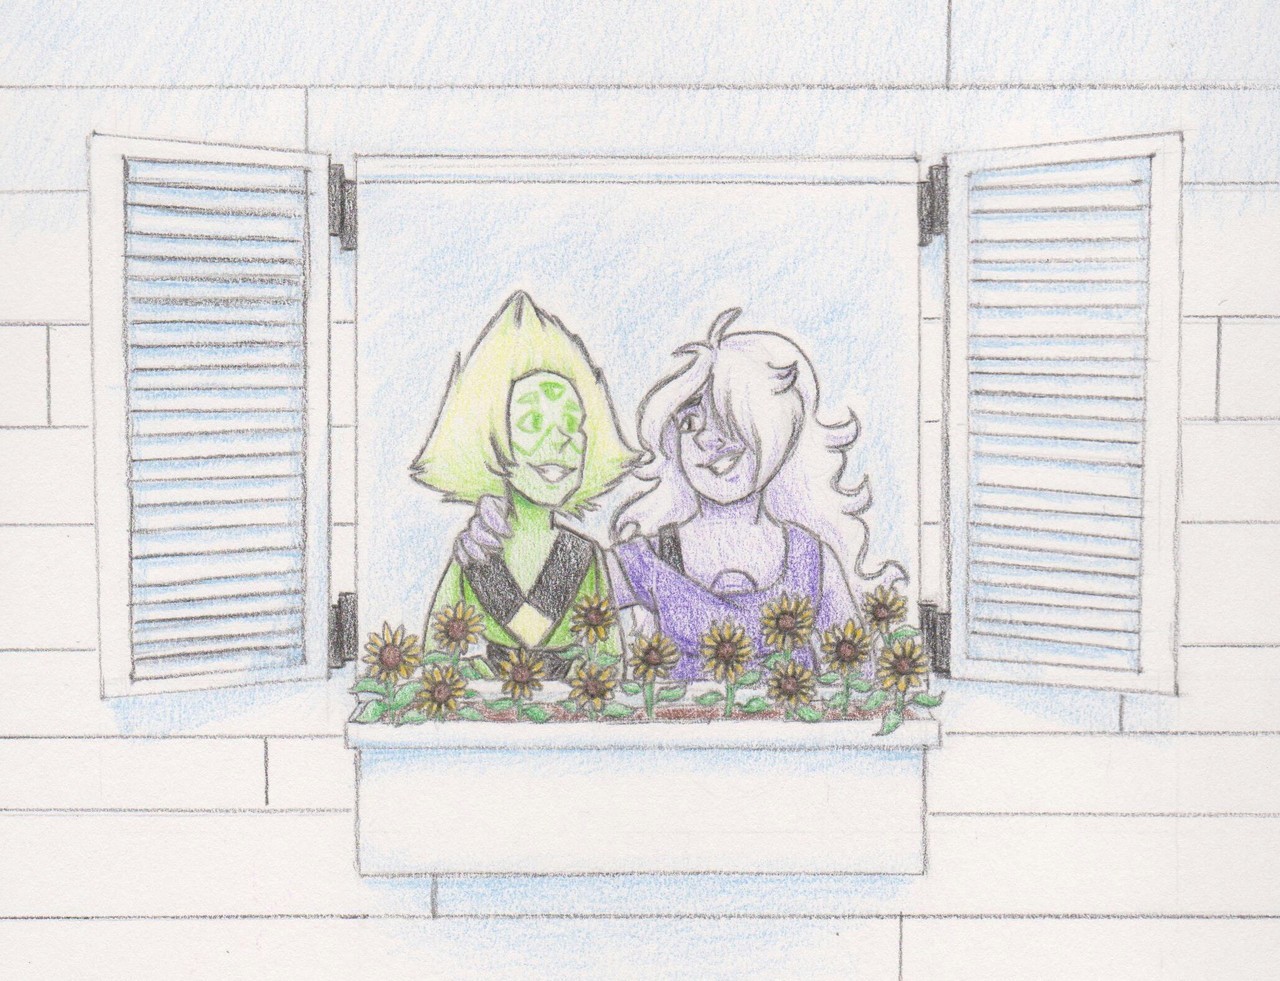 Amethyst and Peridot built a sunflower window garden! 💚💜 Made for a bud for White Day C: